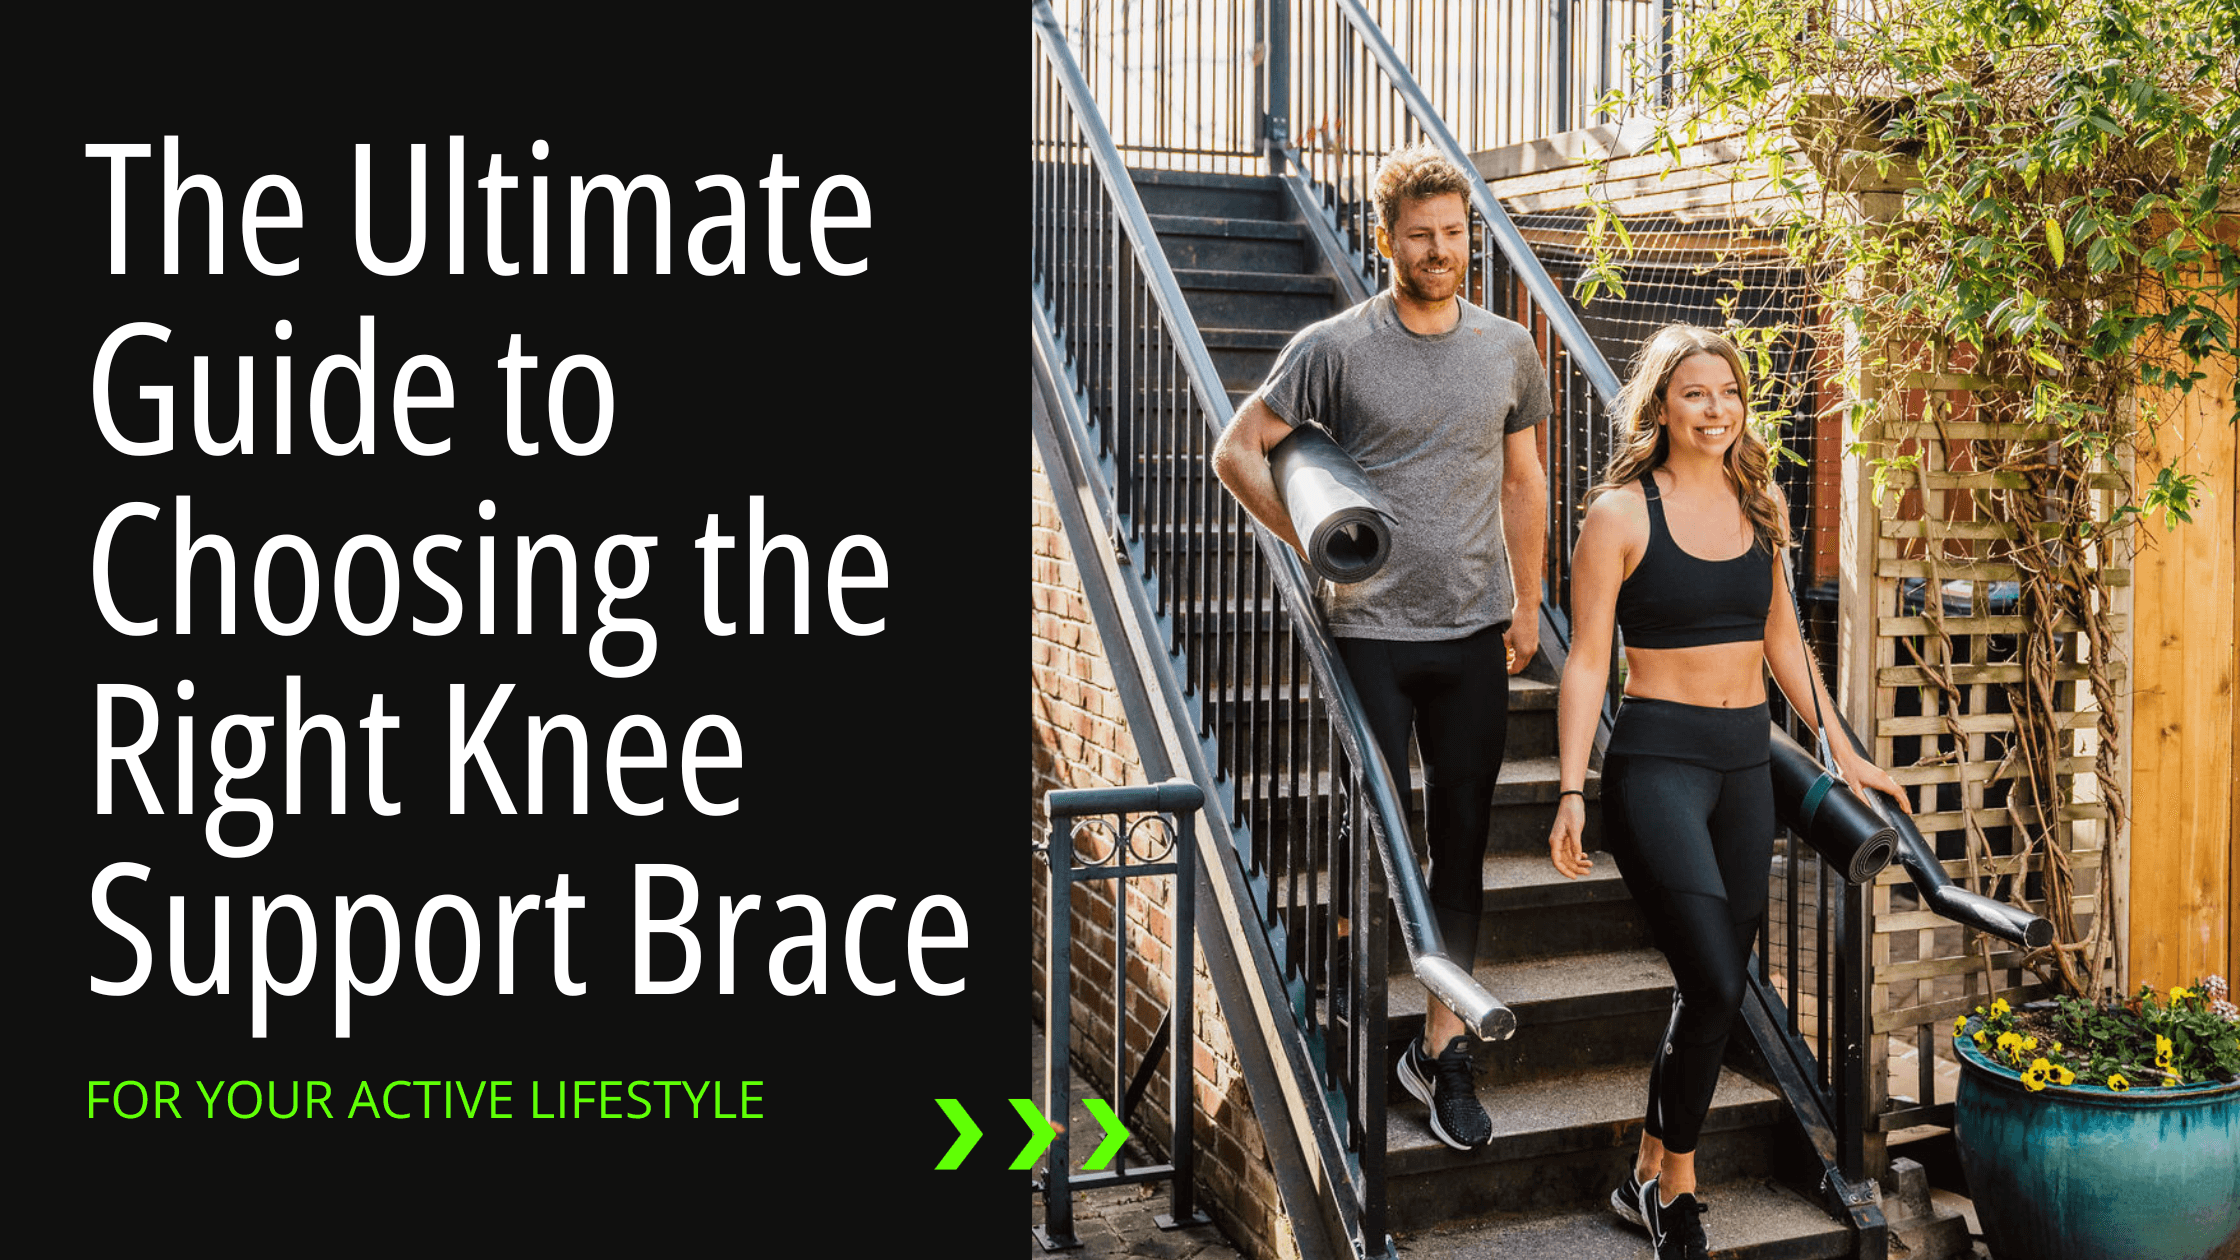 Blog banner for The Ultimate Guide to Choosing the Right Knee Support Brace, Bracelayer Compression Pants, Leggings with Knee Support, Compression Leggings Knee Support, Knee brace, best knee support, knee compression pants, knee brace pants